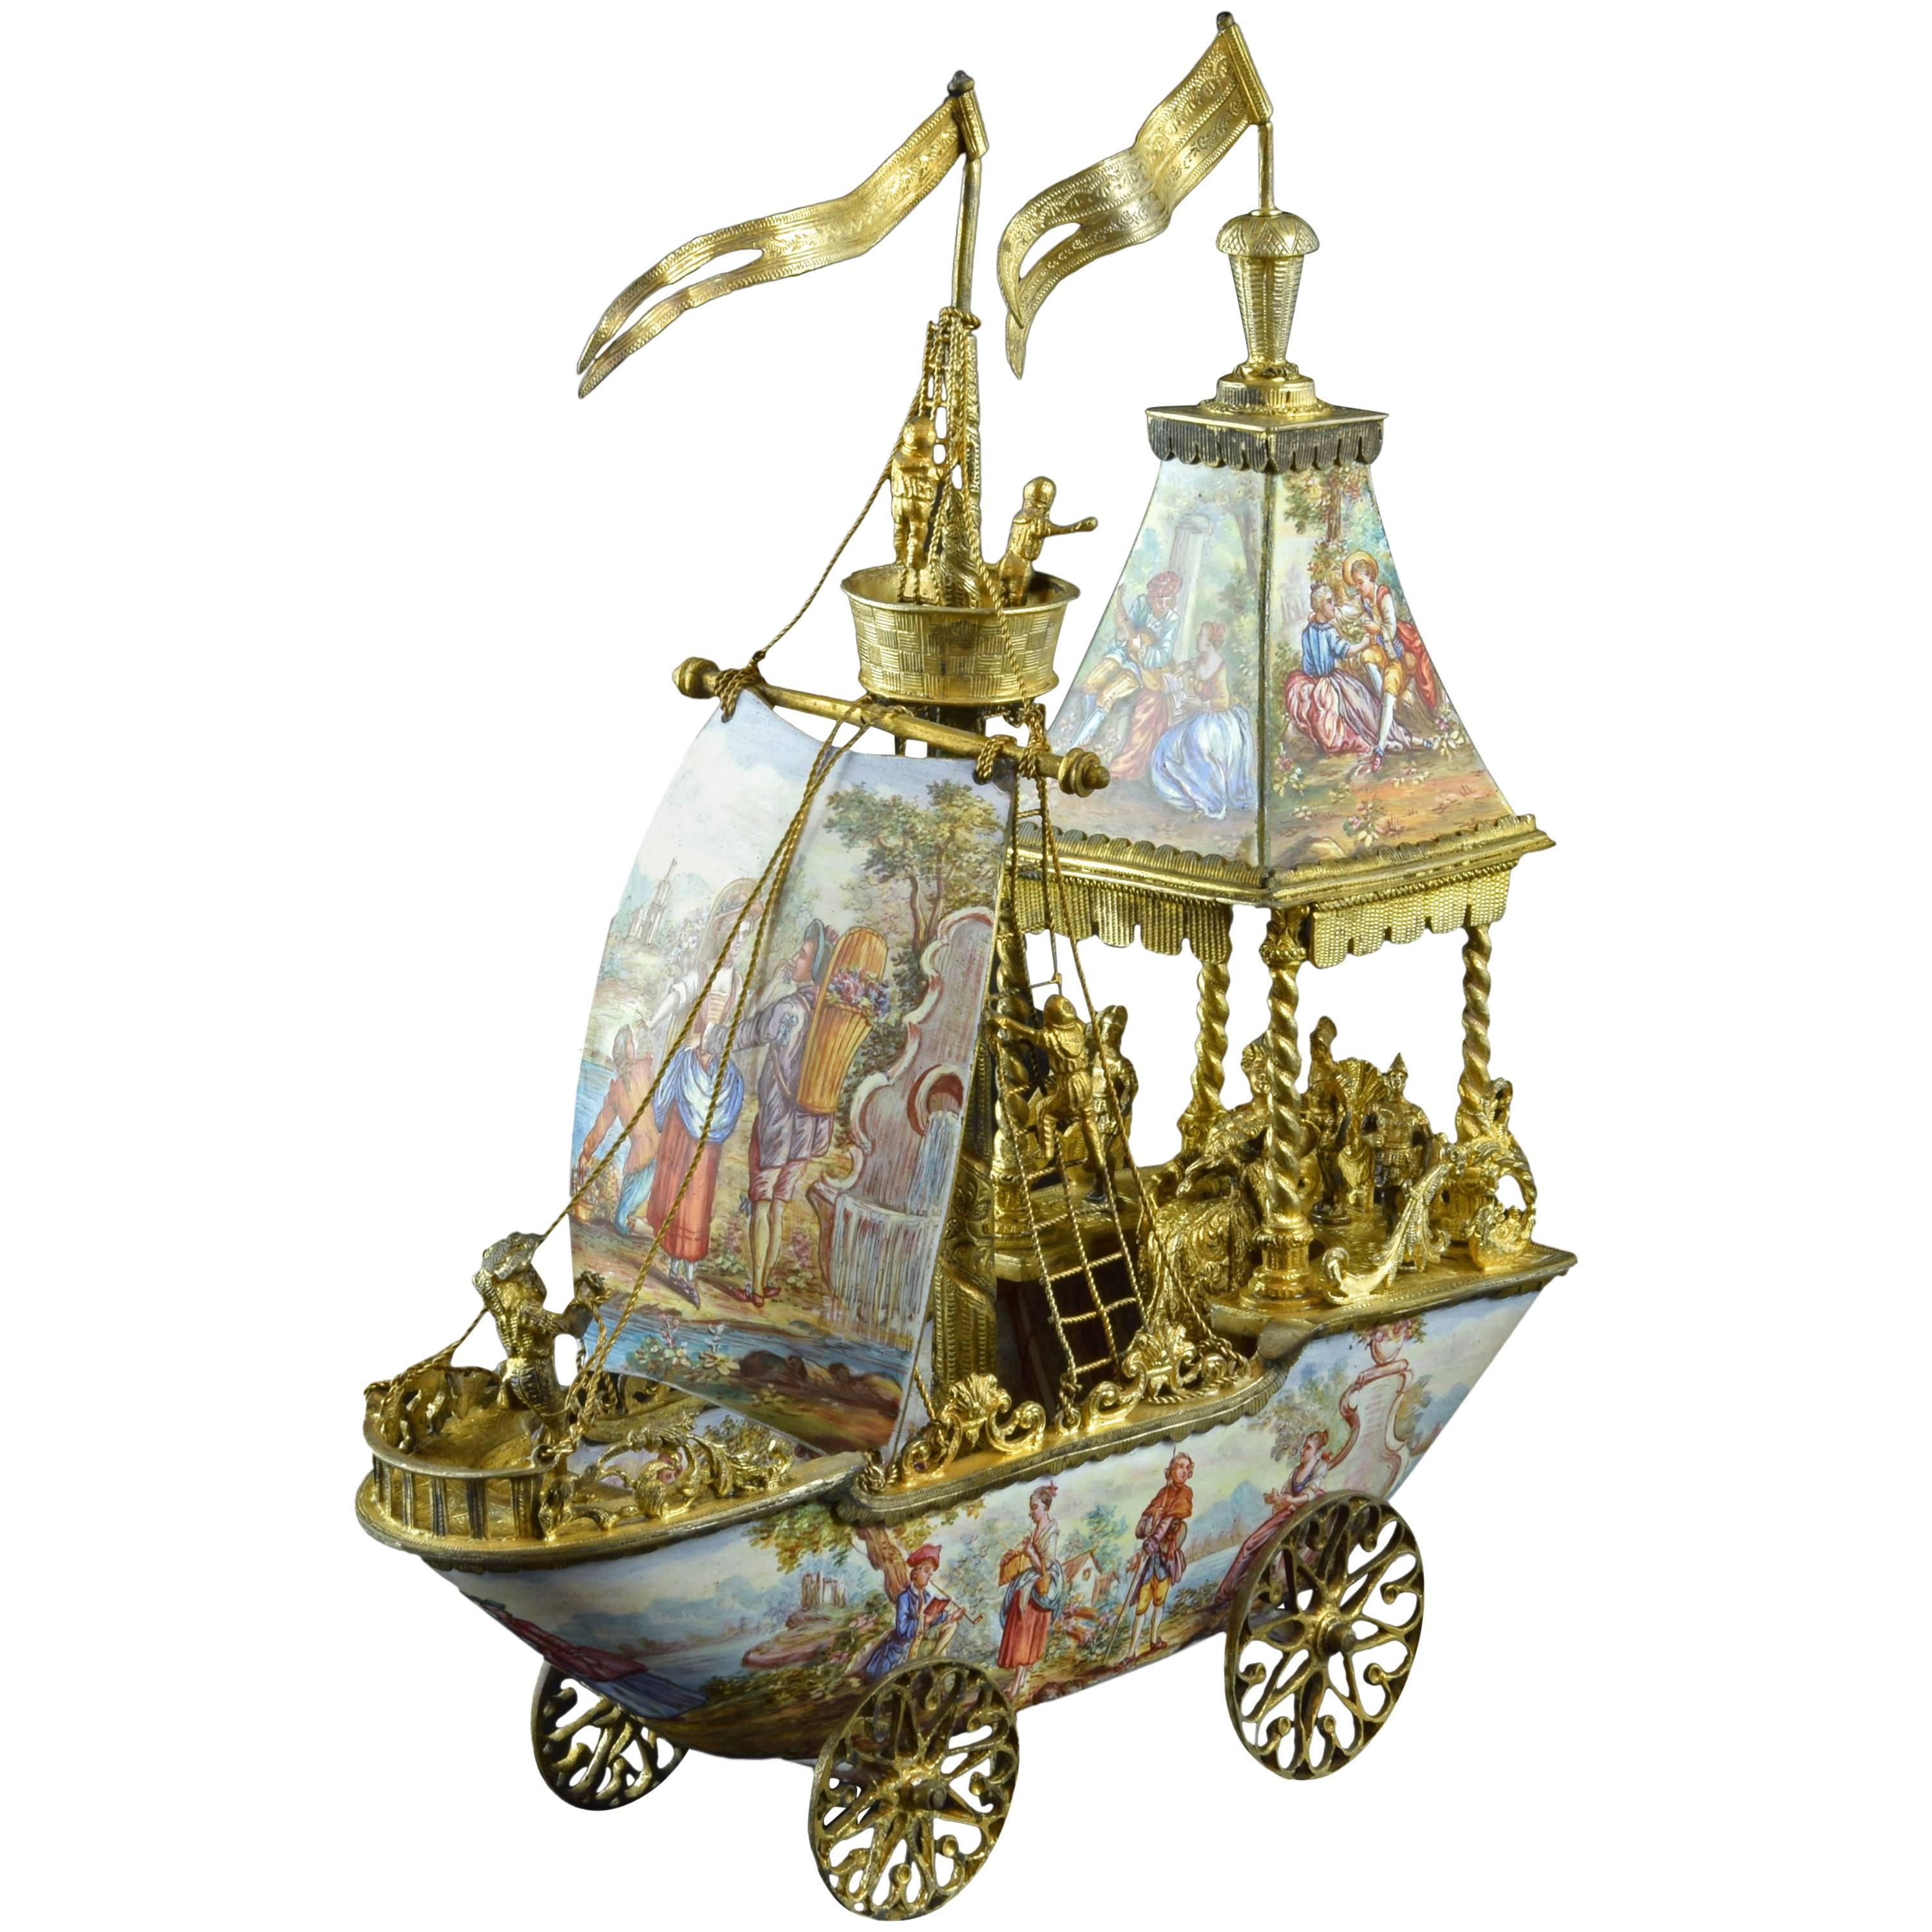 Viennese Enameled Boat, Gilt Silver and Enamel, 19th Century